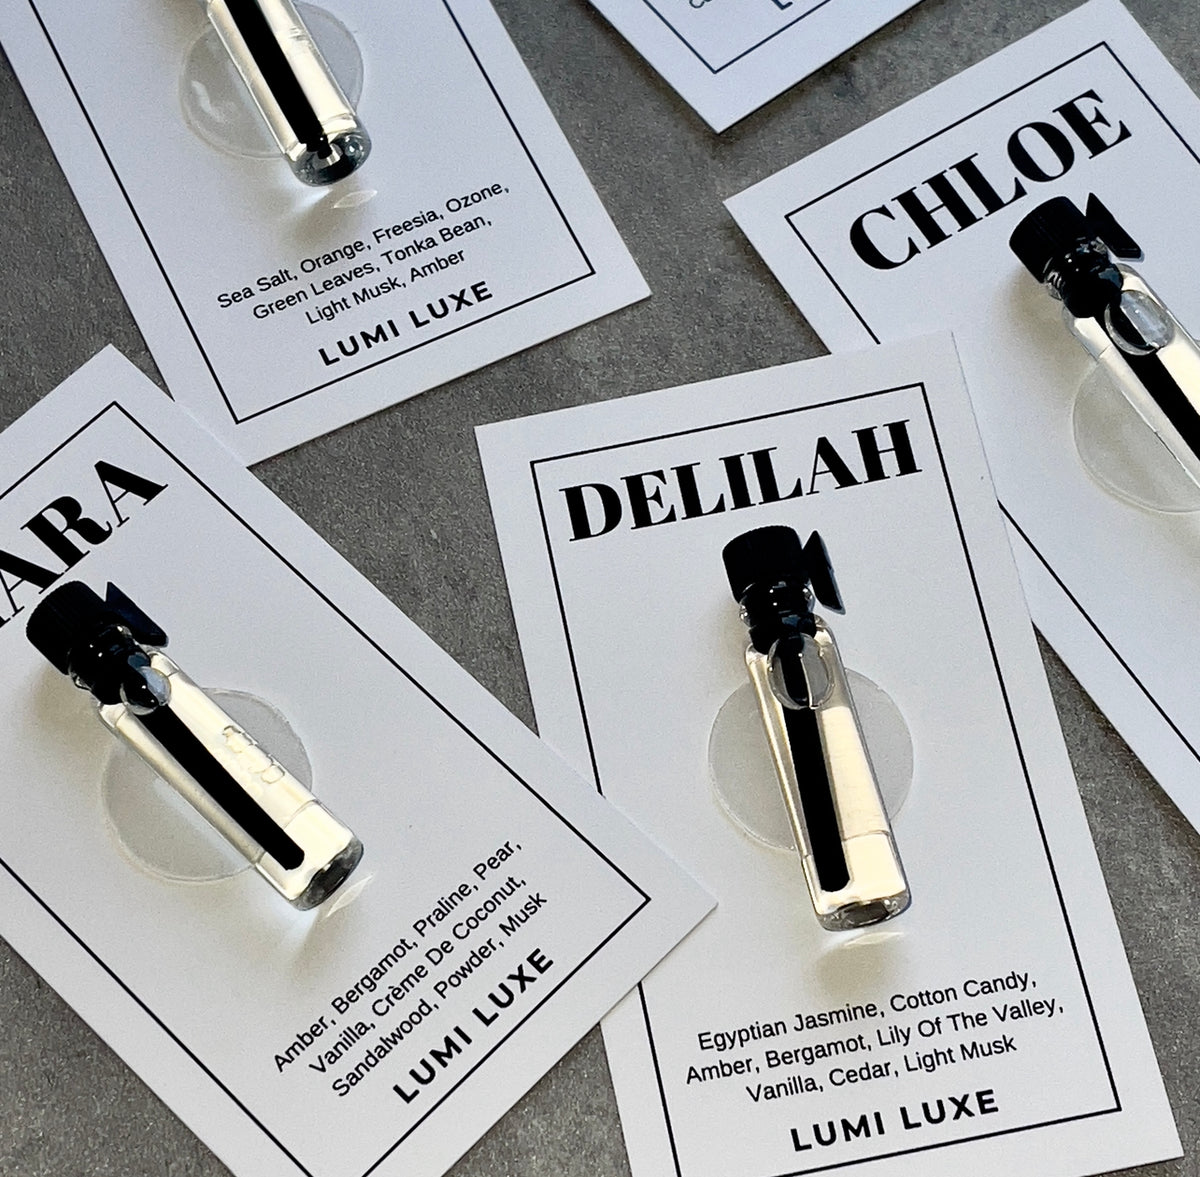 Clean Luxury Fragrance Discovery Set - Customizable - Perfume Oil